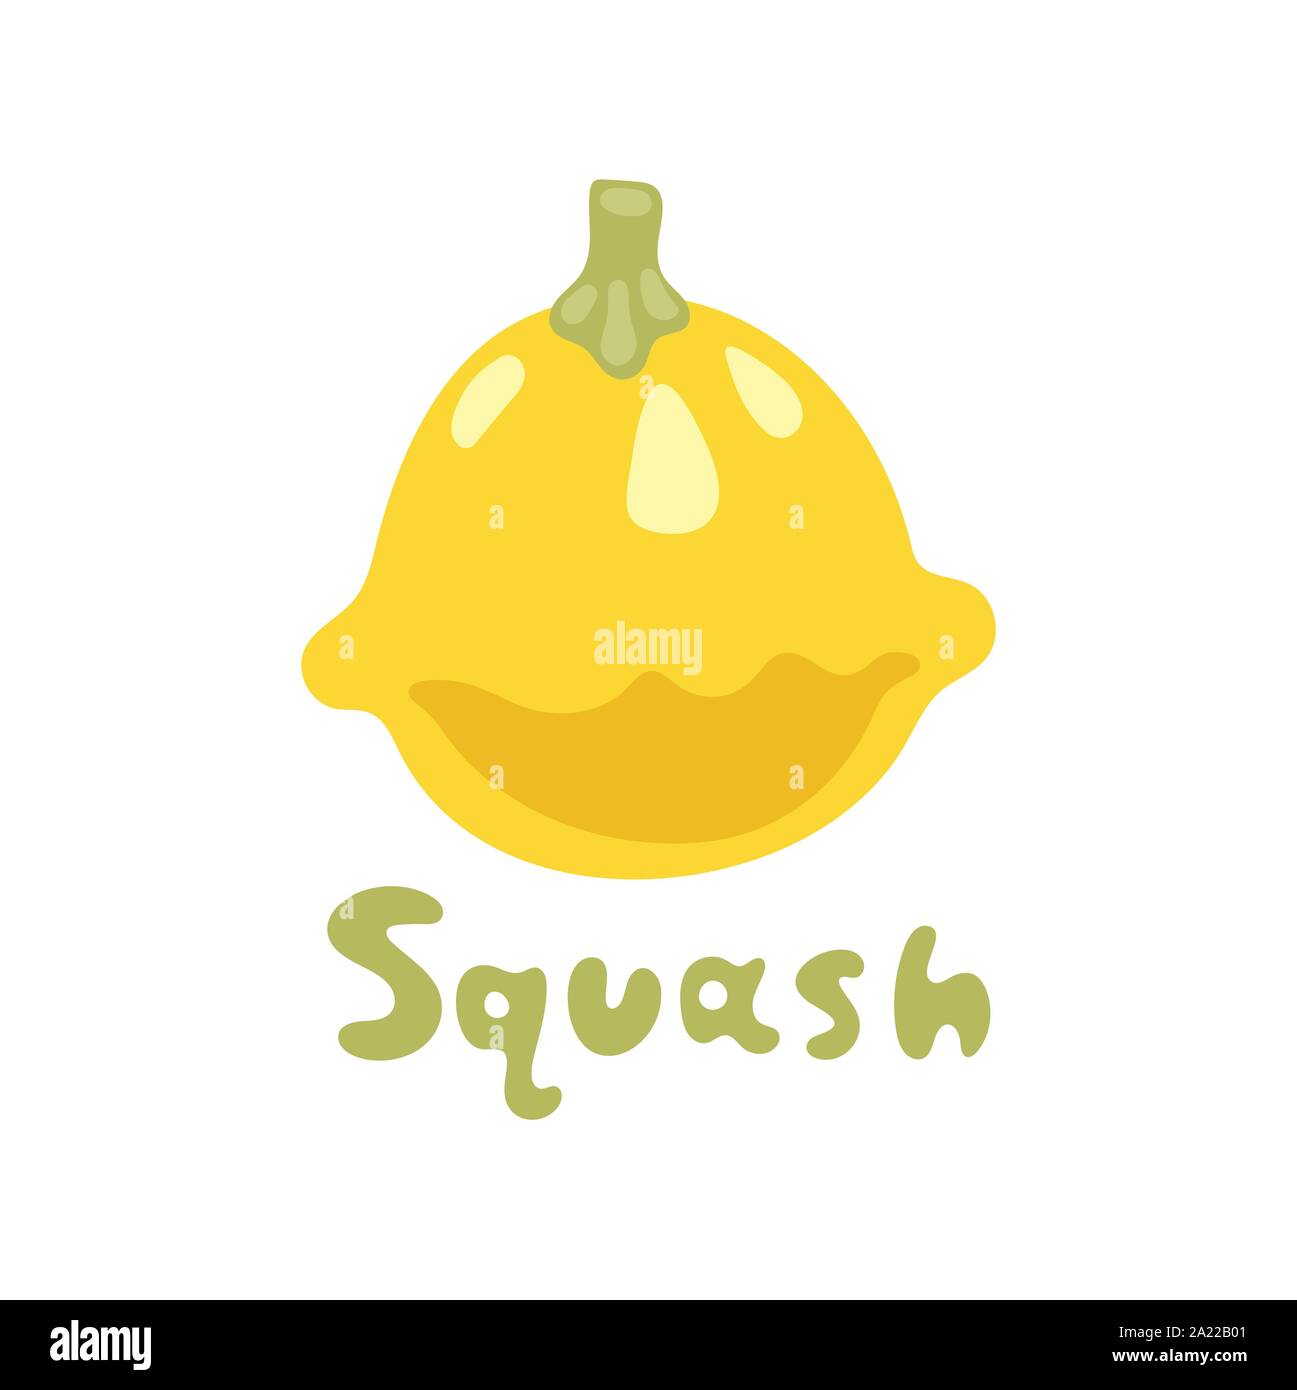 Seasonal squash, gourd vegetable vector illustration. Patty pan squash. Green and yellow image isolated on white background. Stock Vector